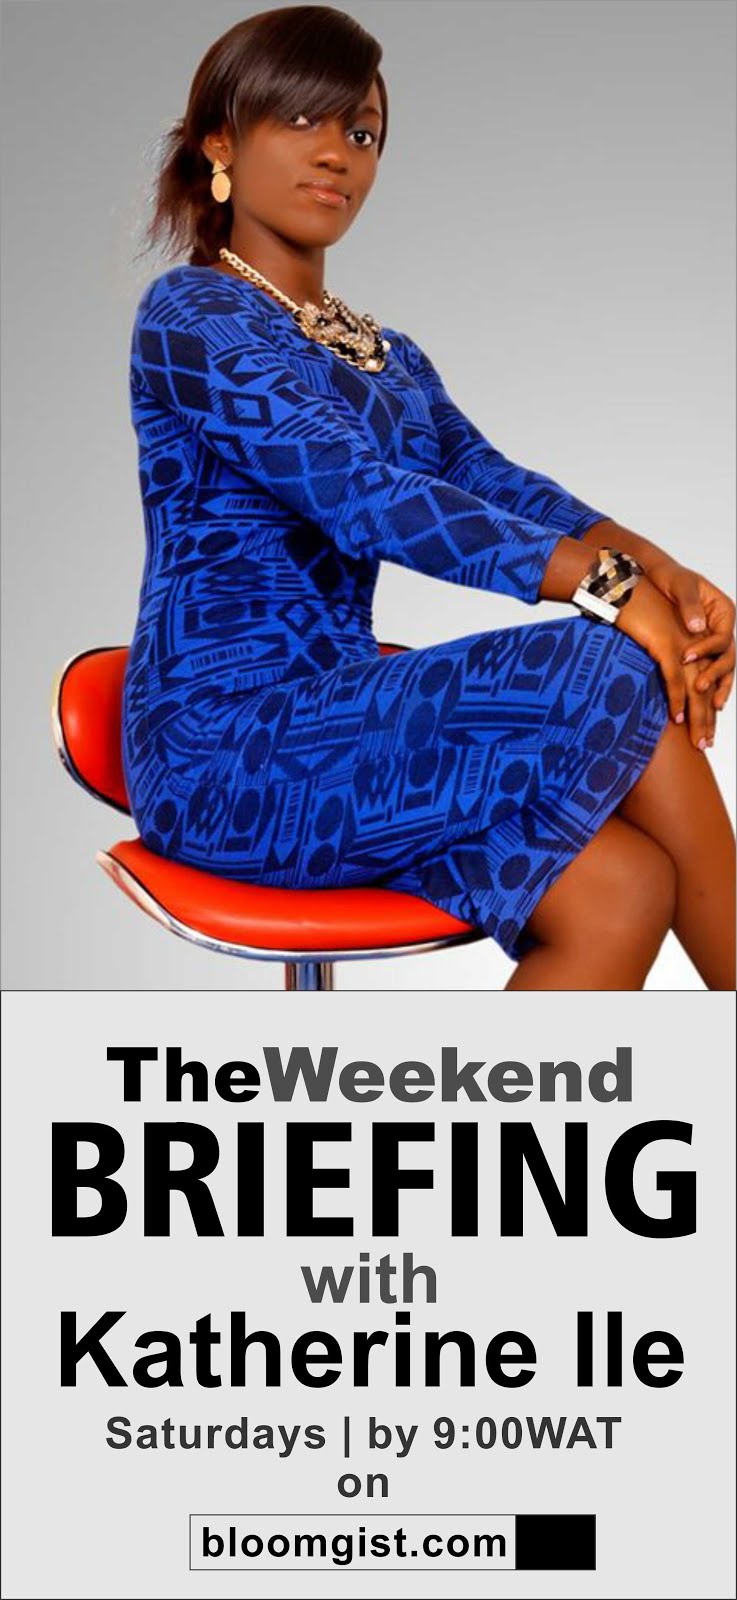 The Weekend Briefing with Katherine Ile